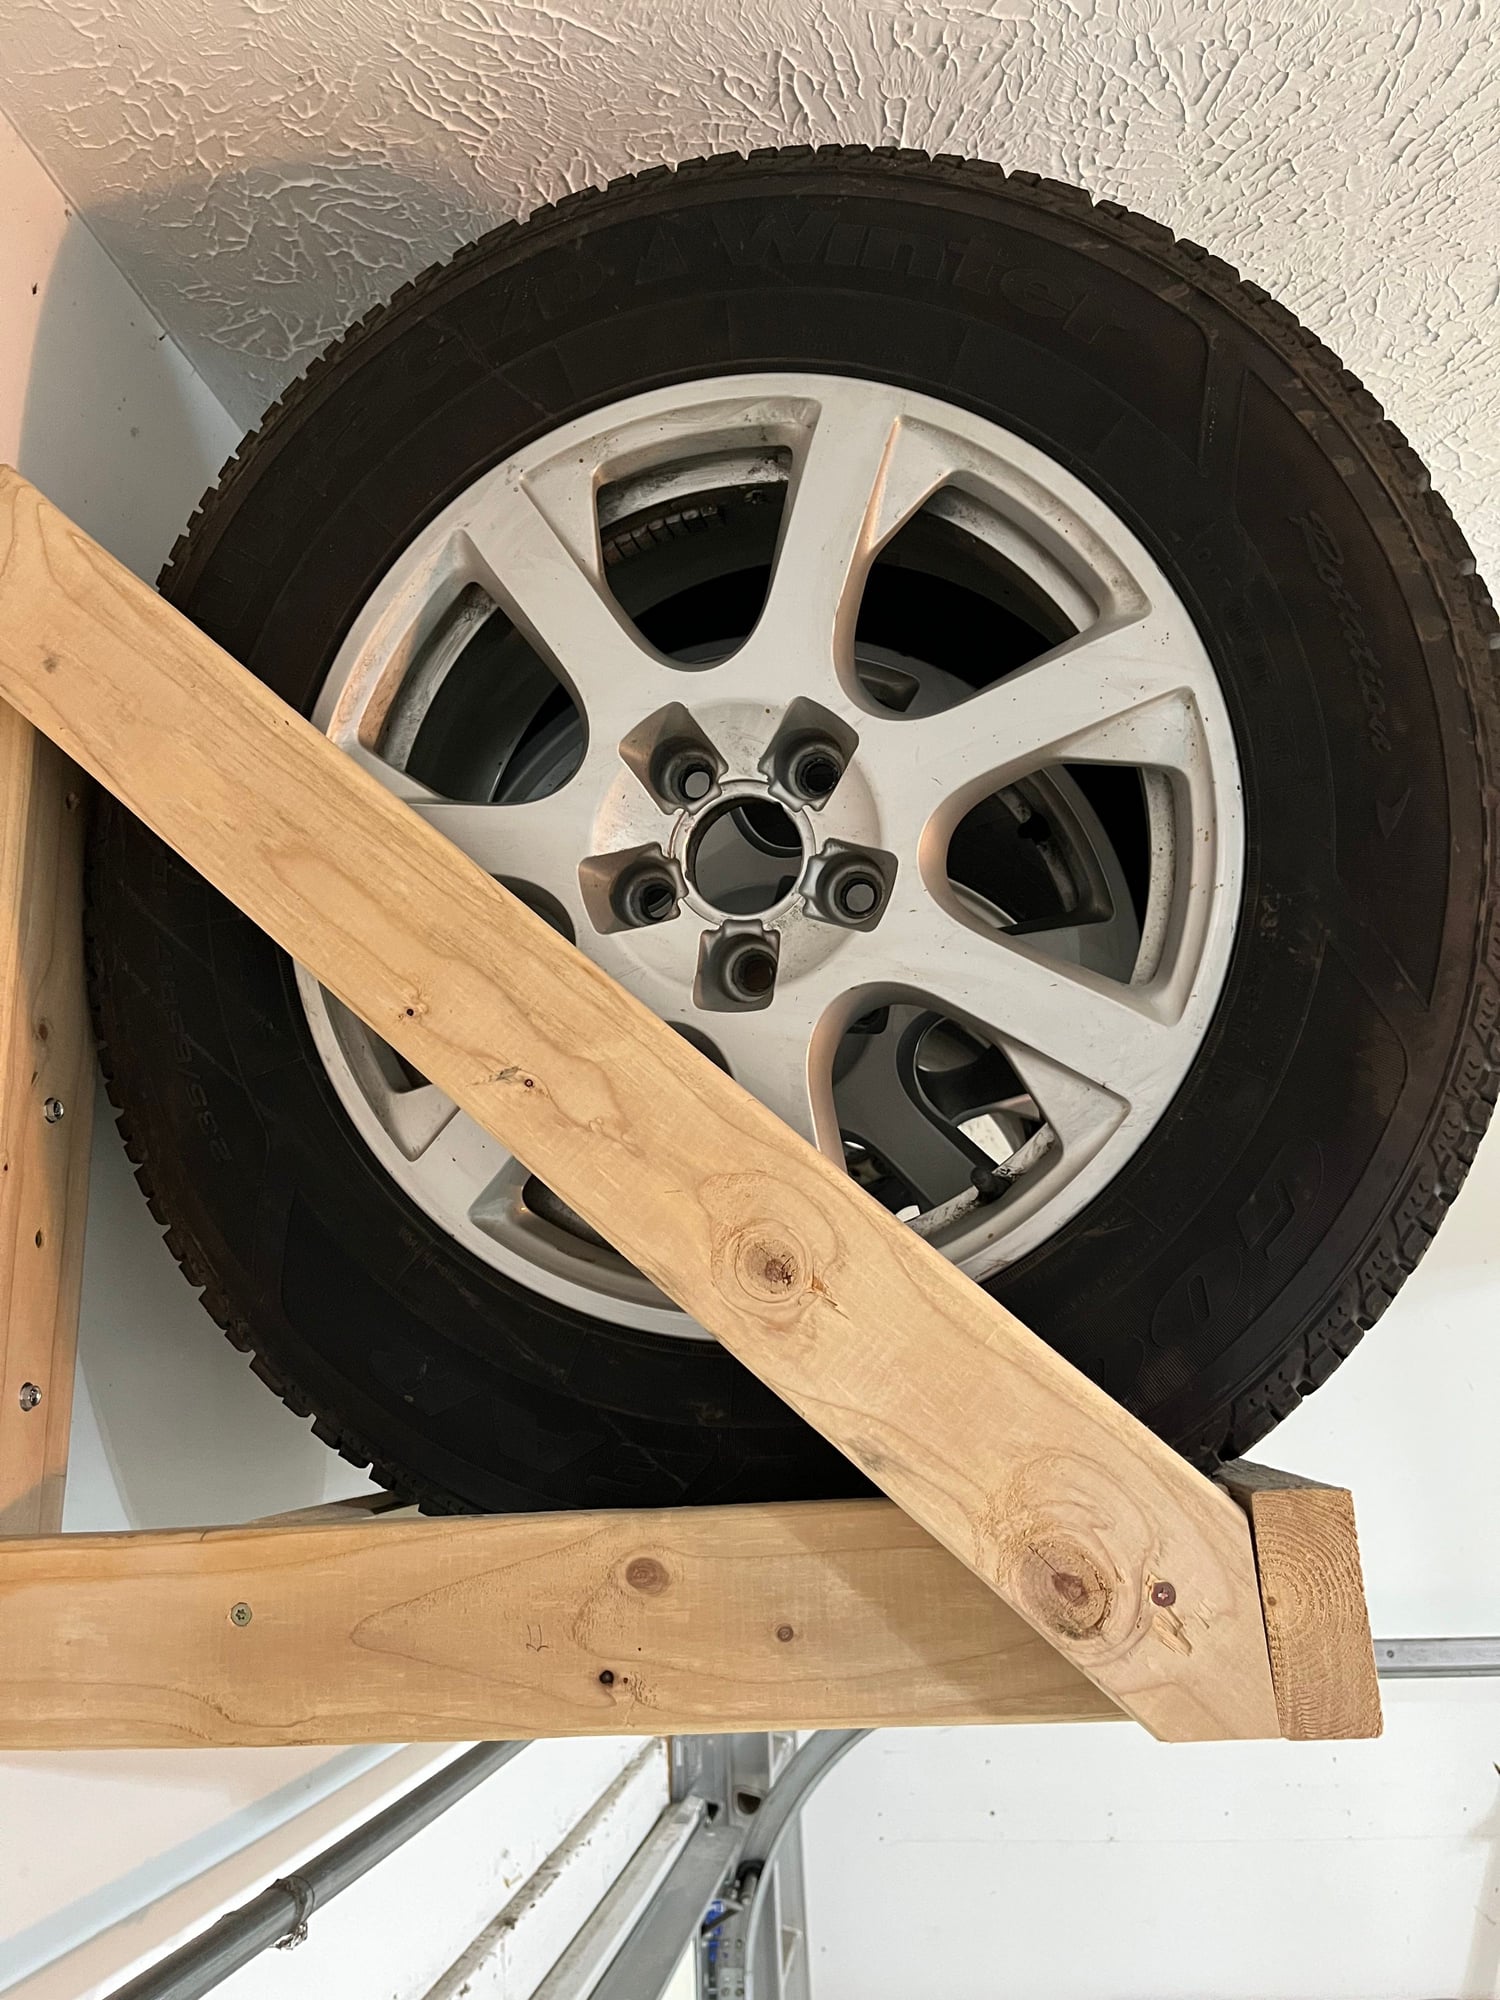 Wheels and Tires/Axles - Audi Q5 Winter wheel/tire set up - Used - 2011 to 2018 Audi Q5 - East Lansing, MI 48823, United States